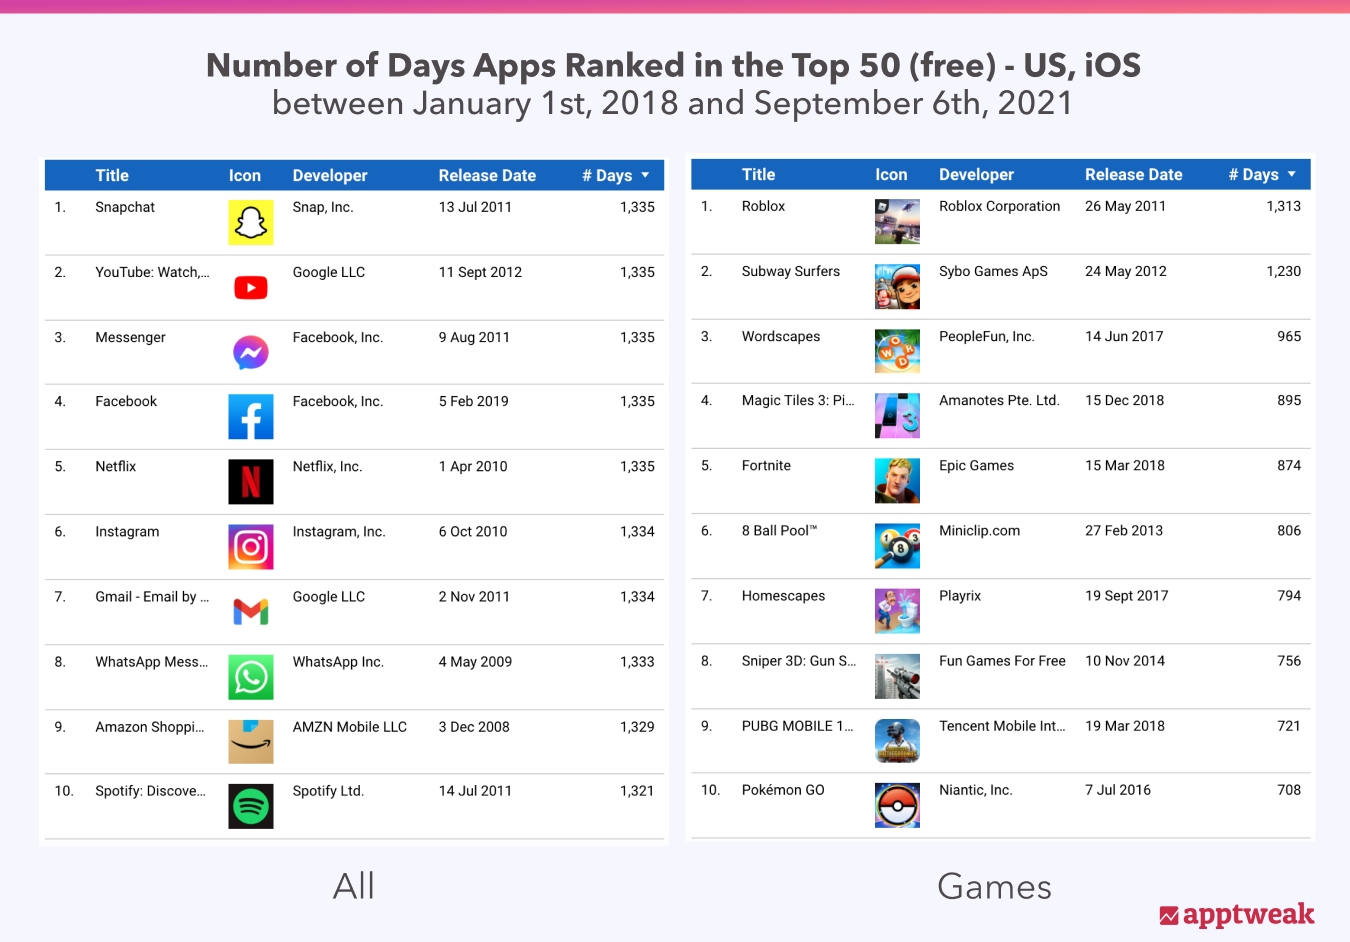 Number of days apps ranked in the top 50 in the categories “All” and “Games” since 2018 (US, iOS)